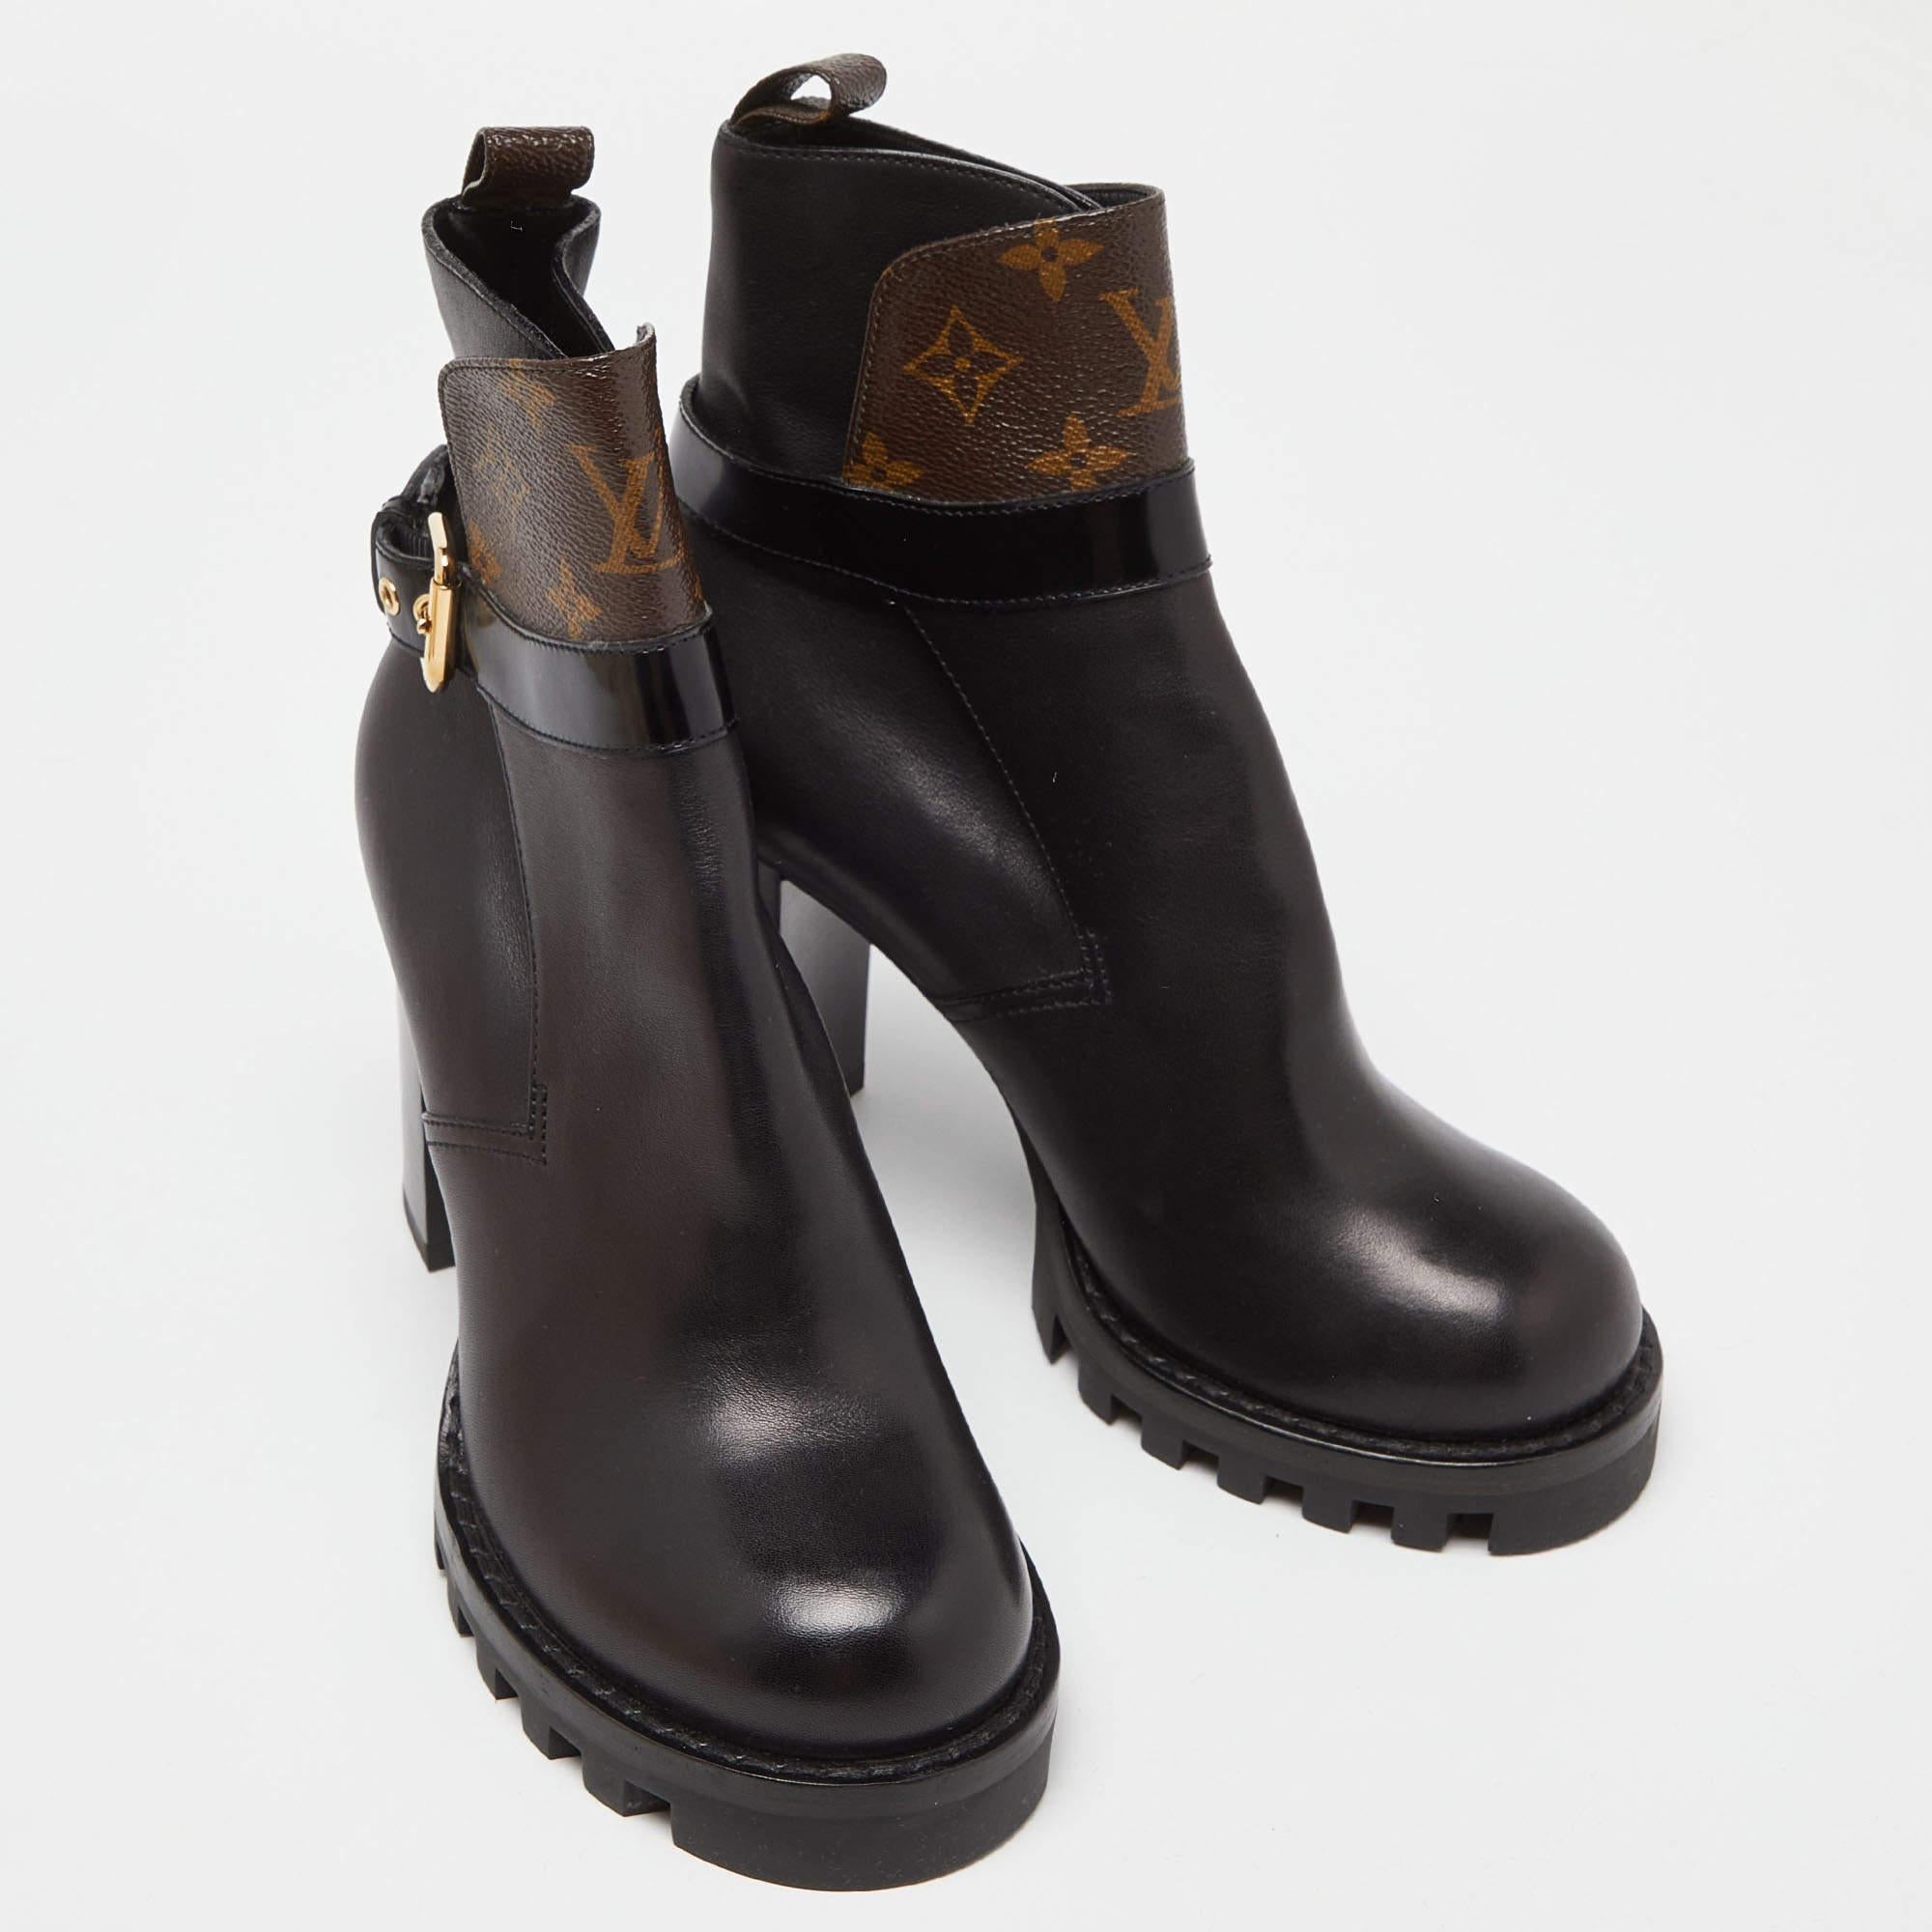 Louis Vuitton Black/Brown Monogram Canvas and Leather Ankle Length Boots Size 39 For Sale 1